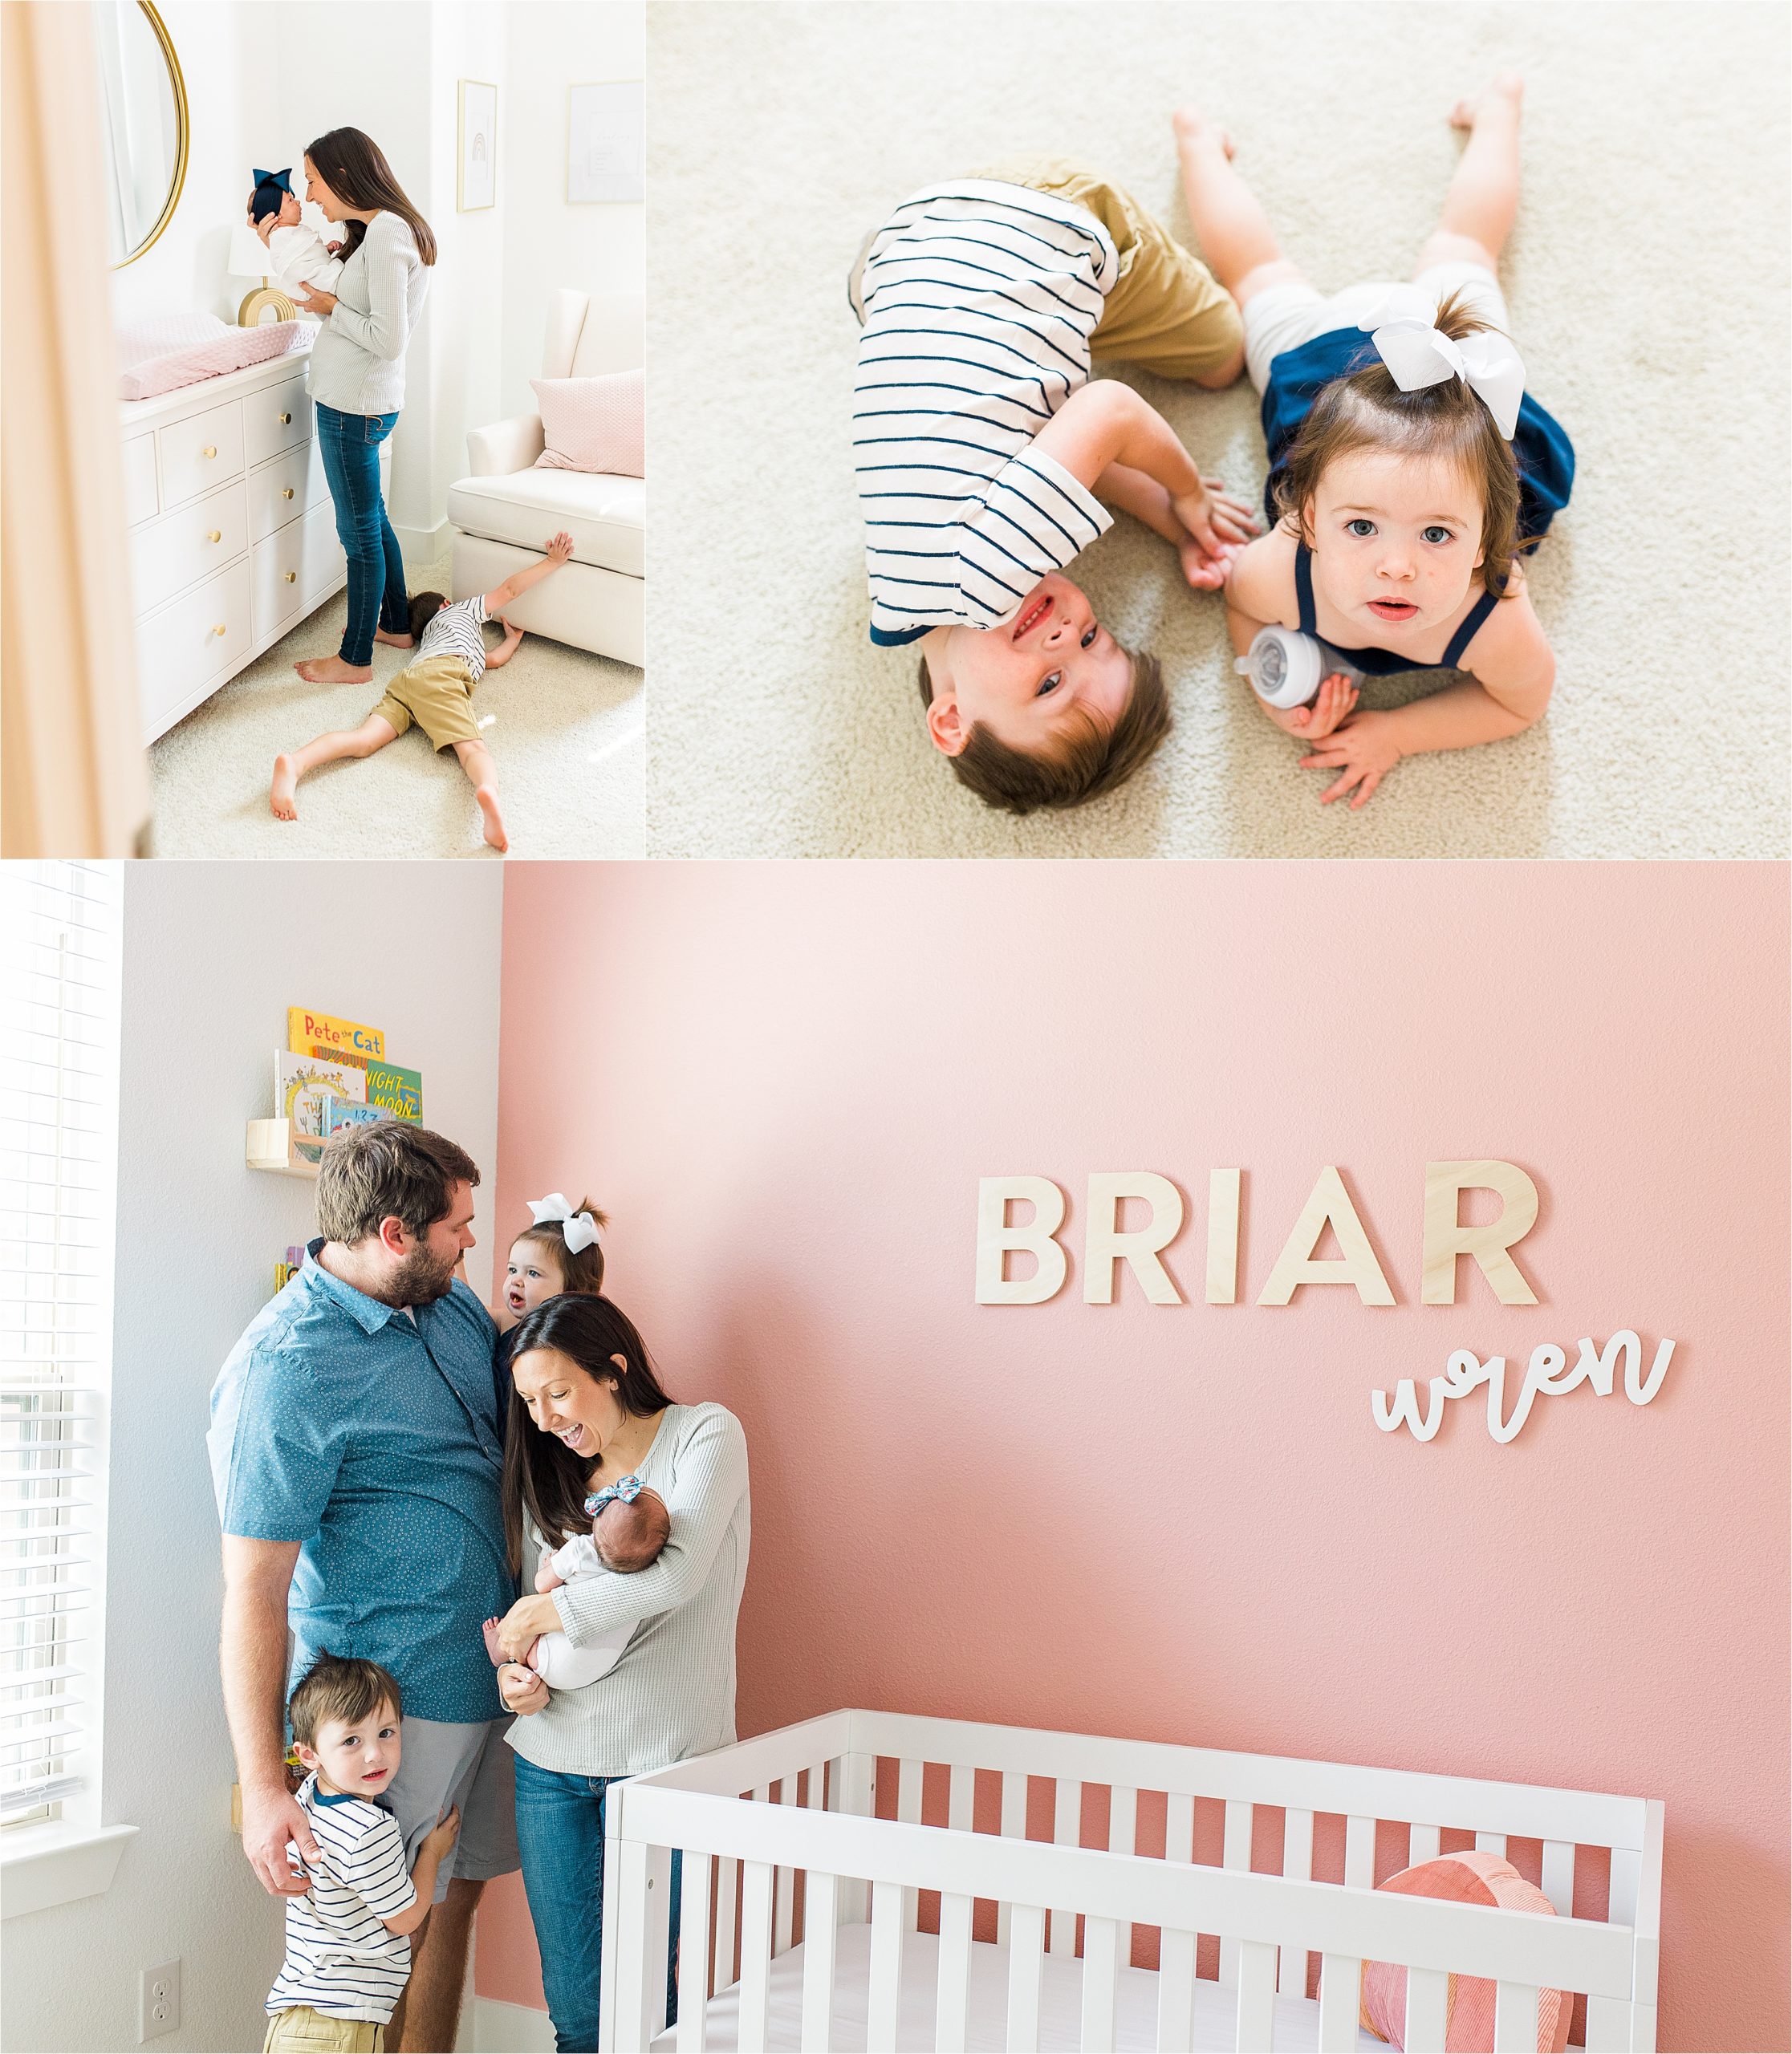 A mom nuzzles her newborn while big brother plays at her feet and a family embraces in front of their newborn daughter's crib during their in home newborn portrait session in San Antonio, Texas